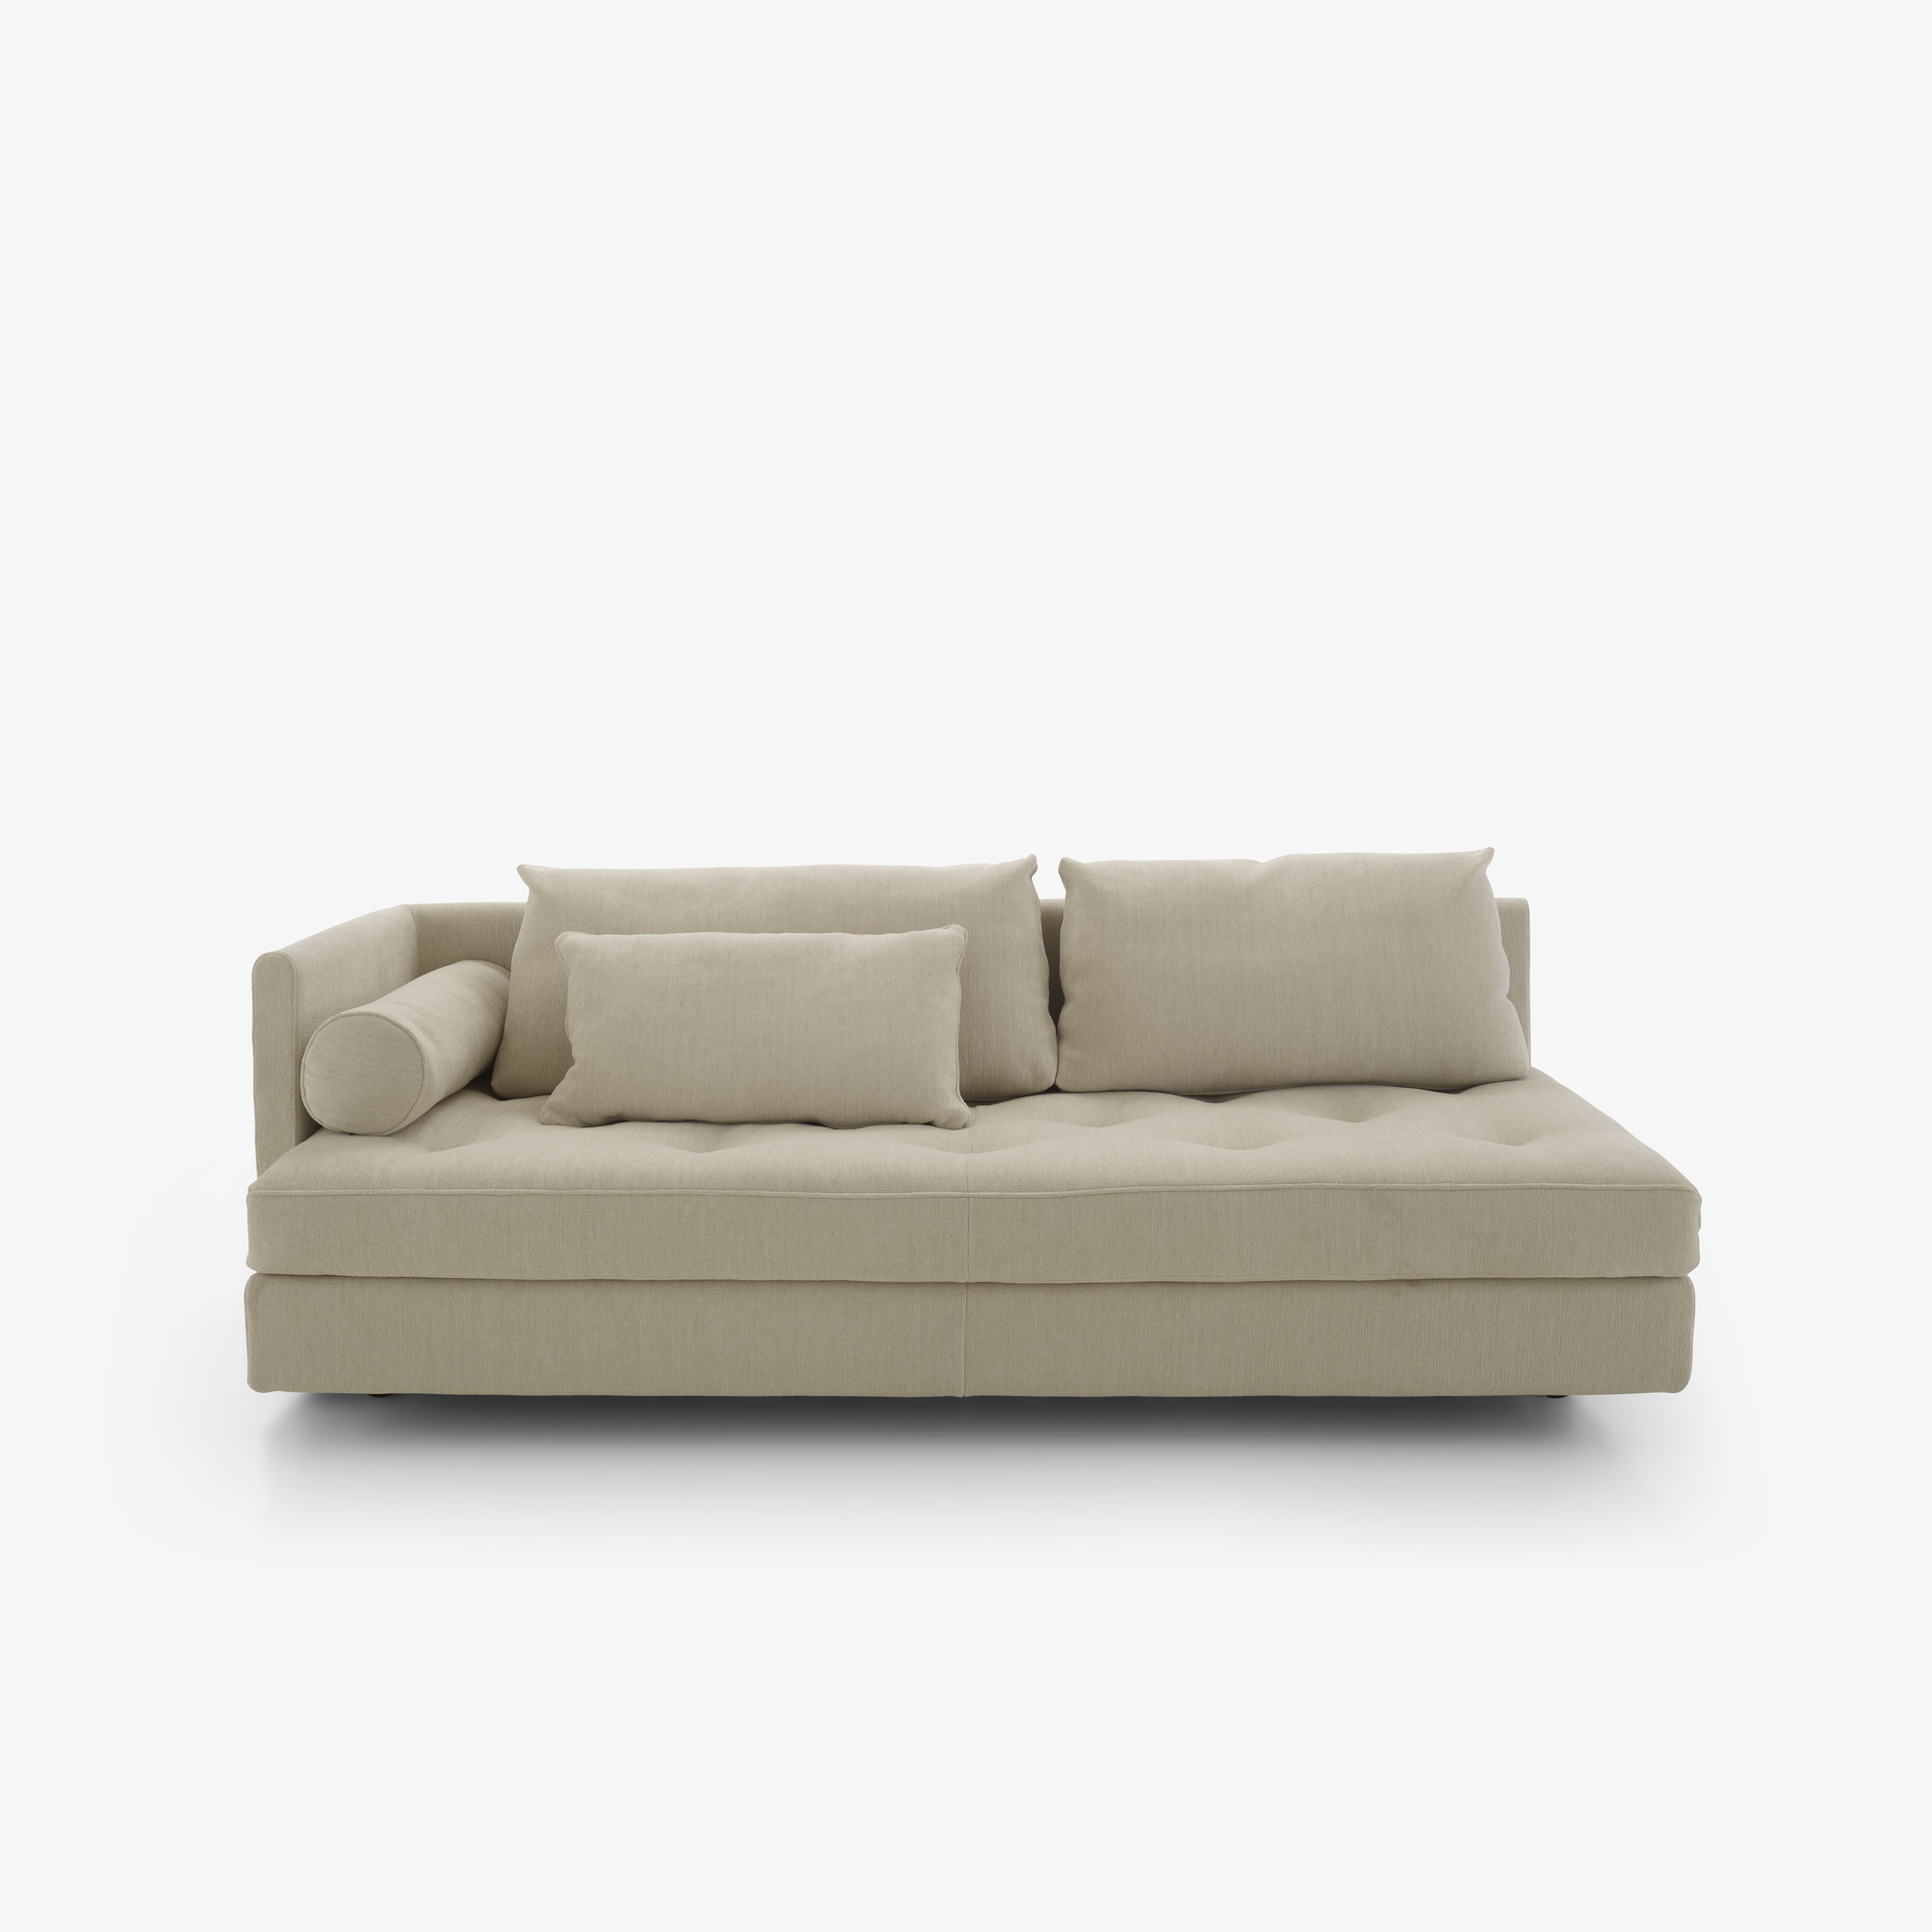 Image LARGE 1-ARMED SETTEE